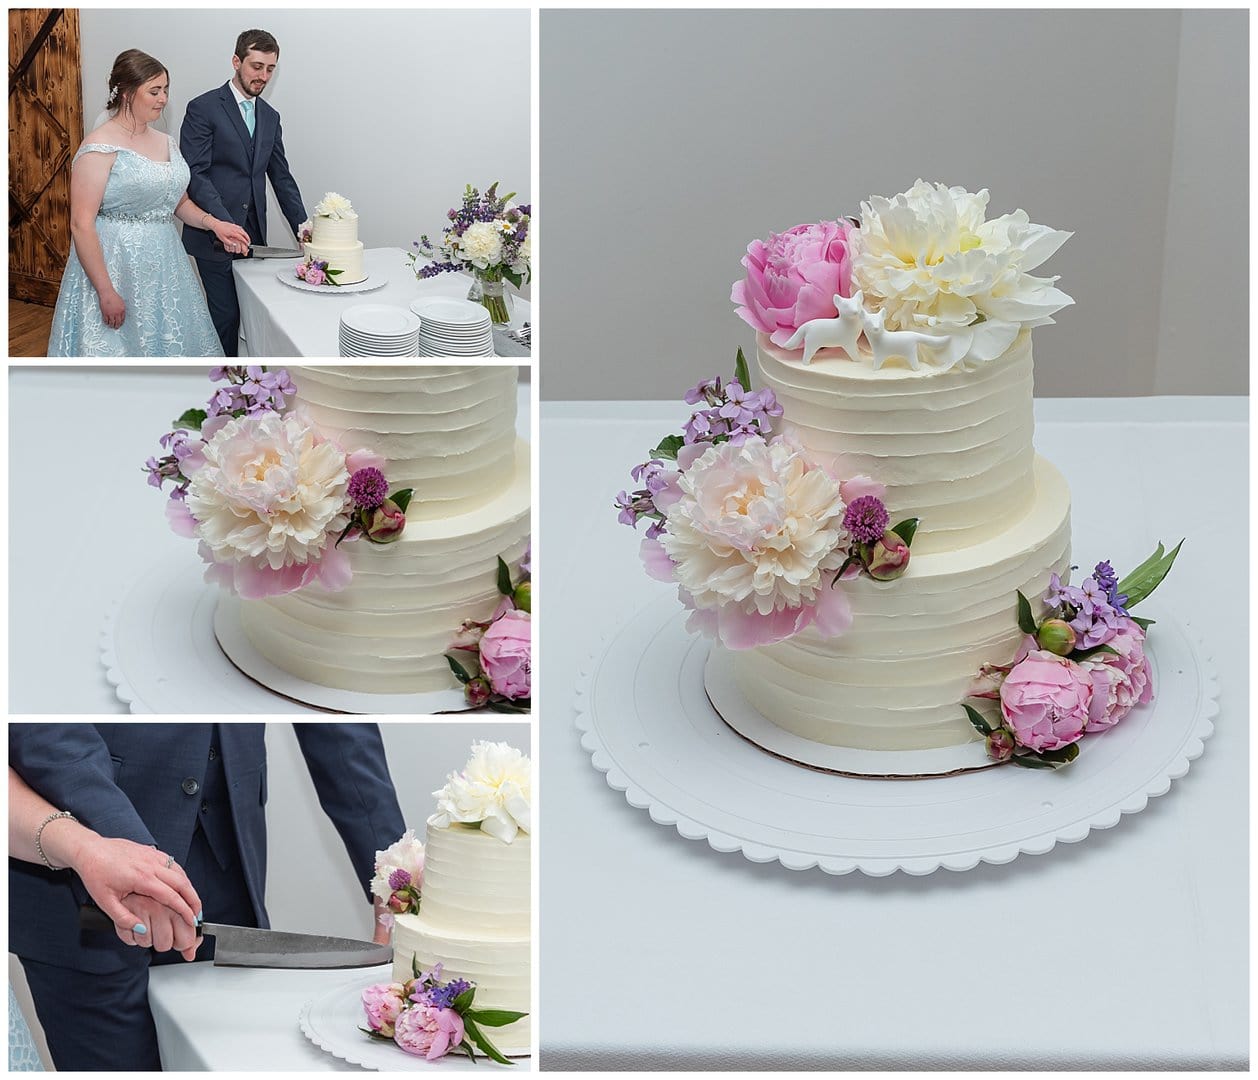 The bride and groom cut their wedding cake during their wedding reception at the Founders House in Annapolis Royal, NS.